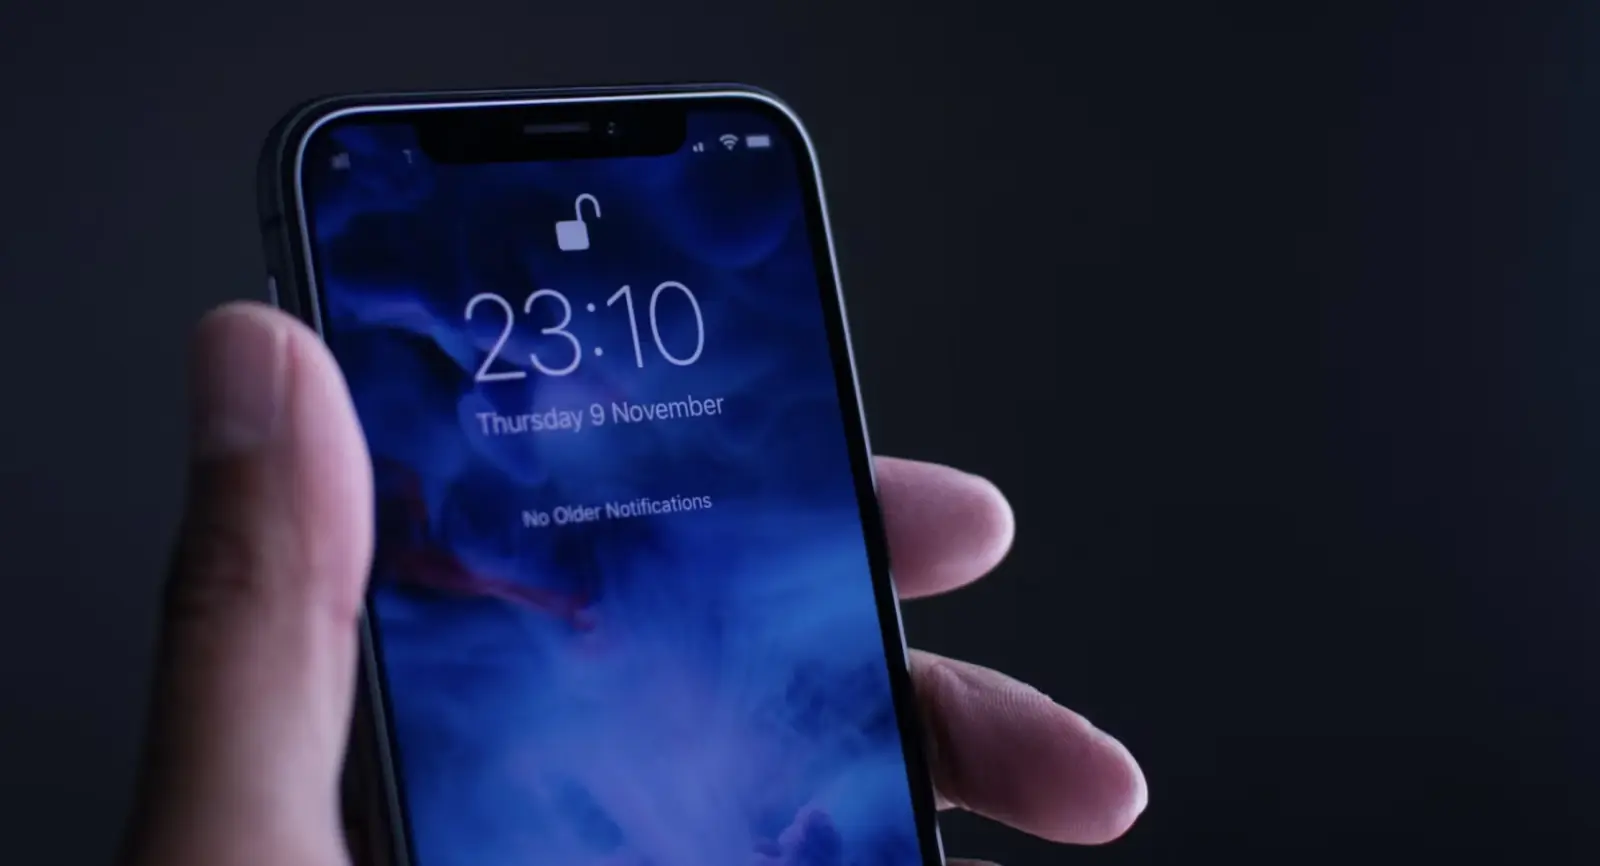 Bug in iPhone: Many users' iPhones are locked, Face ID is not working, this is how the phone will open